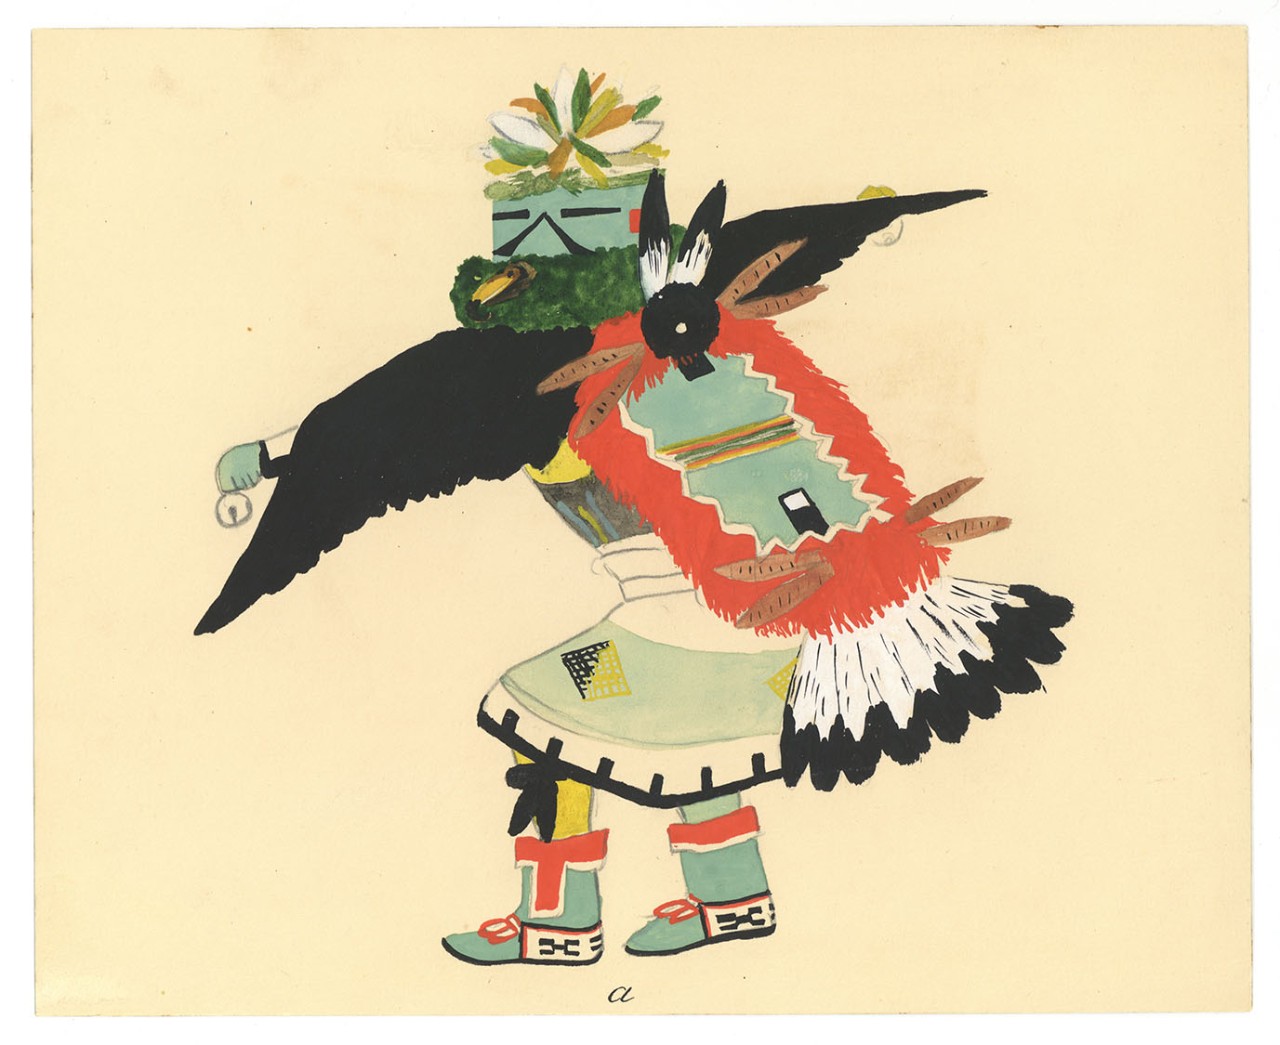 Unidentified Zuñi artist, Zuñi Kachina Painting: Kakali (Eagle), made before 1940, pencil, ink, and watercolor on poster board